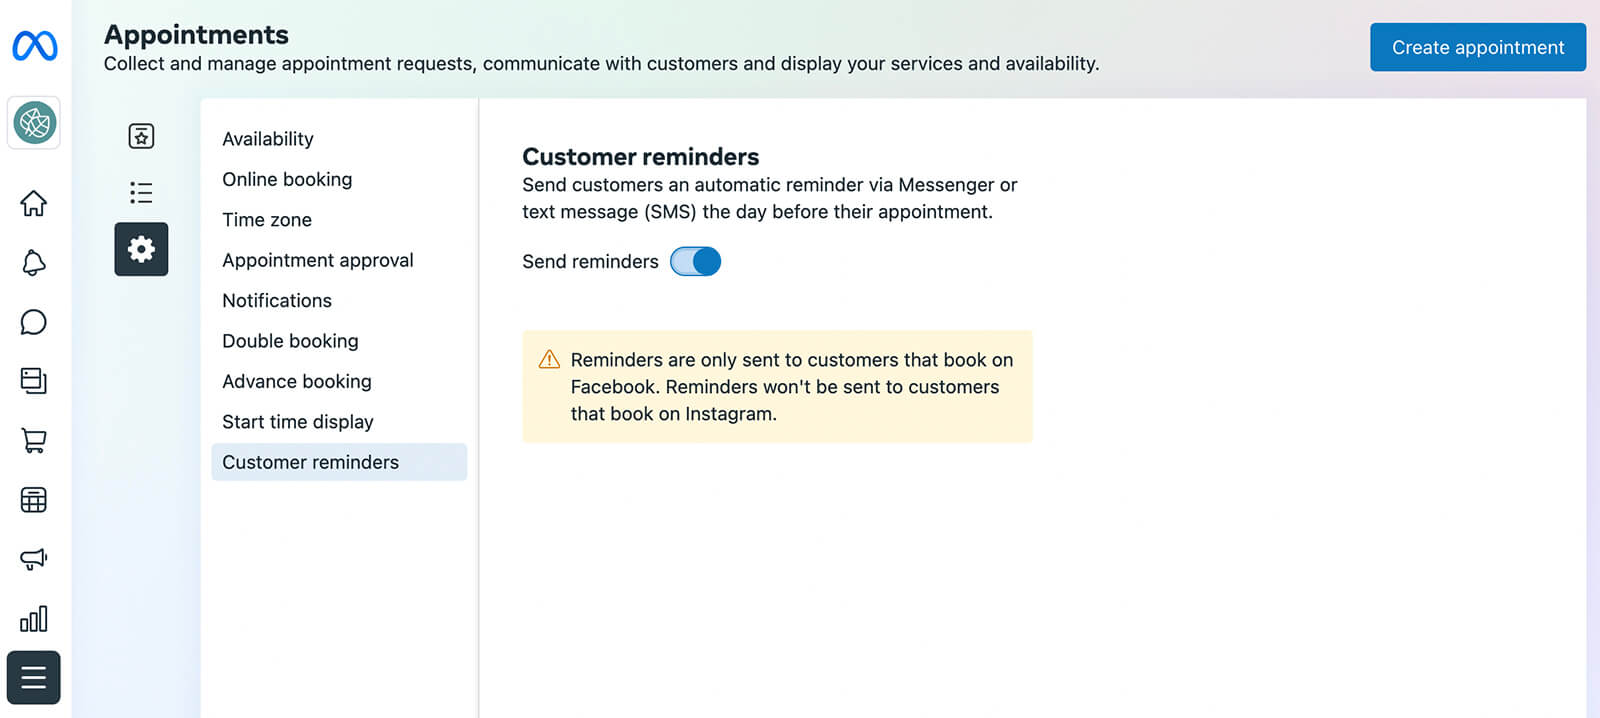 how-to-manage-booked-appointments-or-reservations-through-meta-business-suite-send-reminders-panel-click-settings-tab-select-customer-reminders-click-toggle-to-enable-example-19